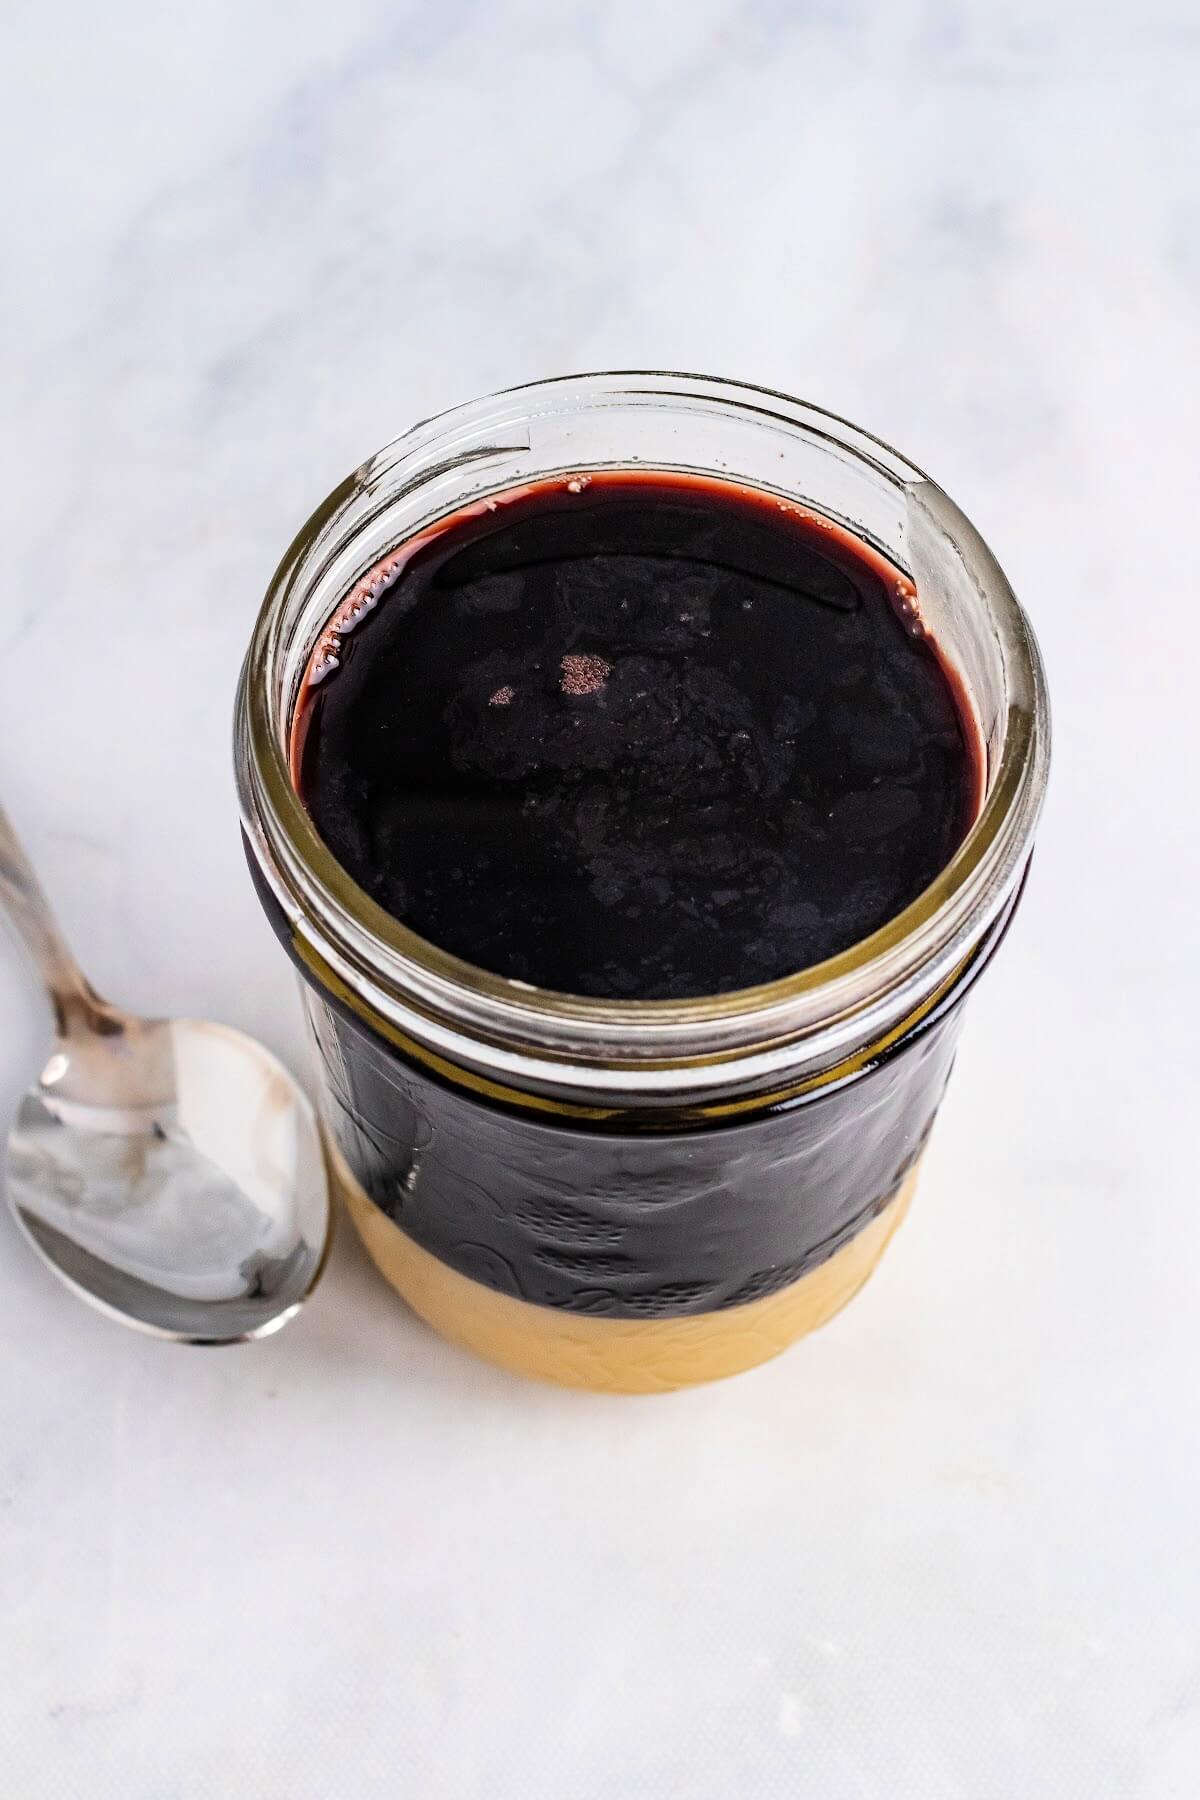 Overhead view of a mason jar ¾ filled with a dark purple syrup and ¼ filled at the bottom with honey, with a spoon sitting next to it.